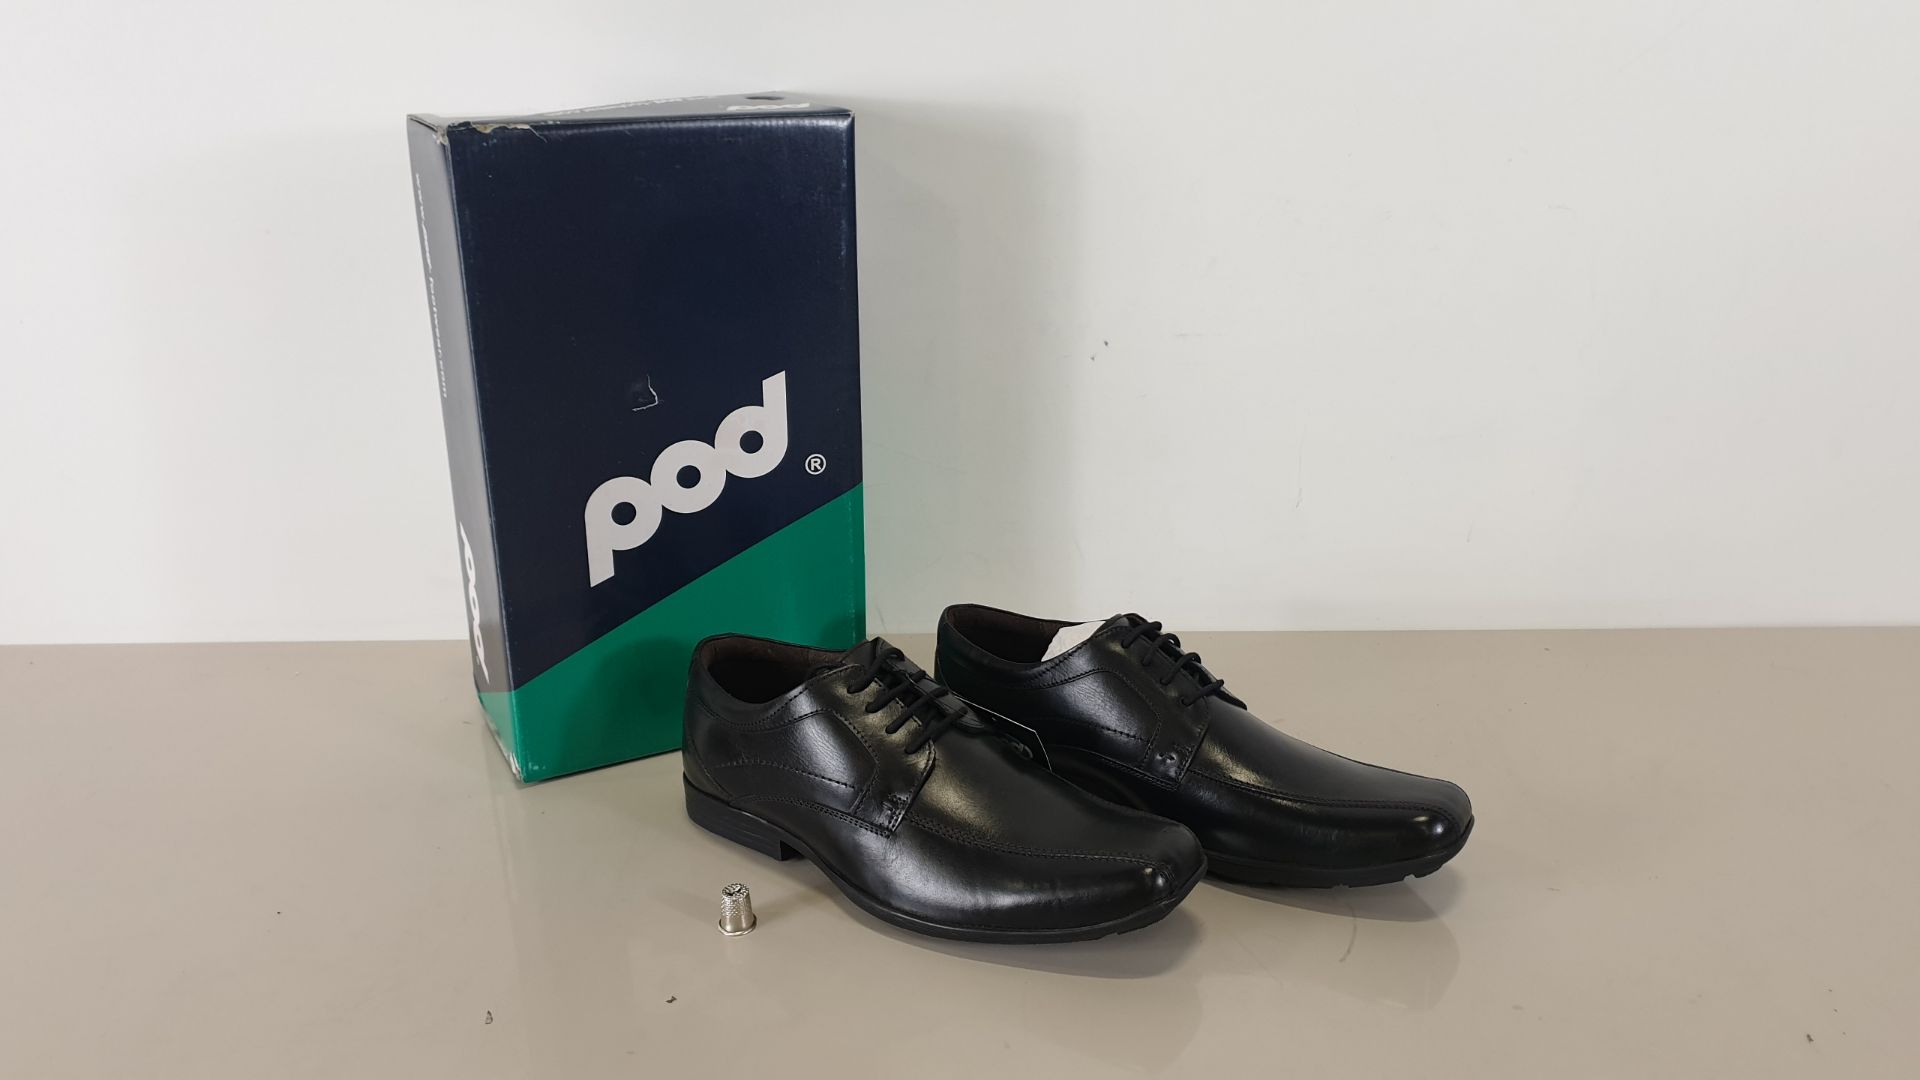 10 BRAND NEW & BOXED PAIRS OF POD MENS SHOES SIZE EUR 42 CHESTER BLACK DESIGN